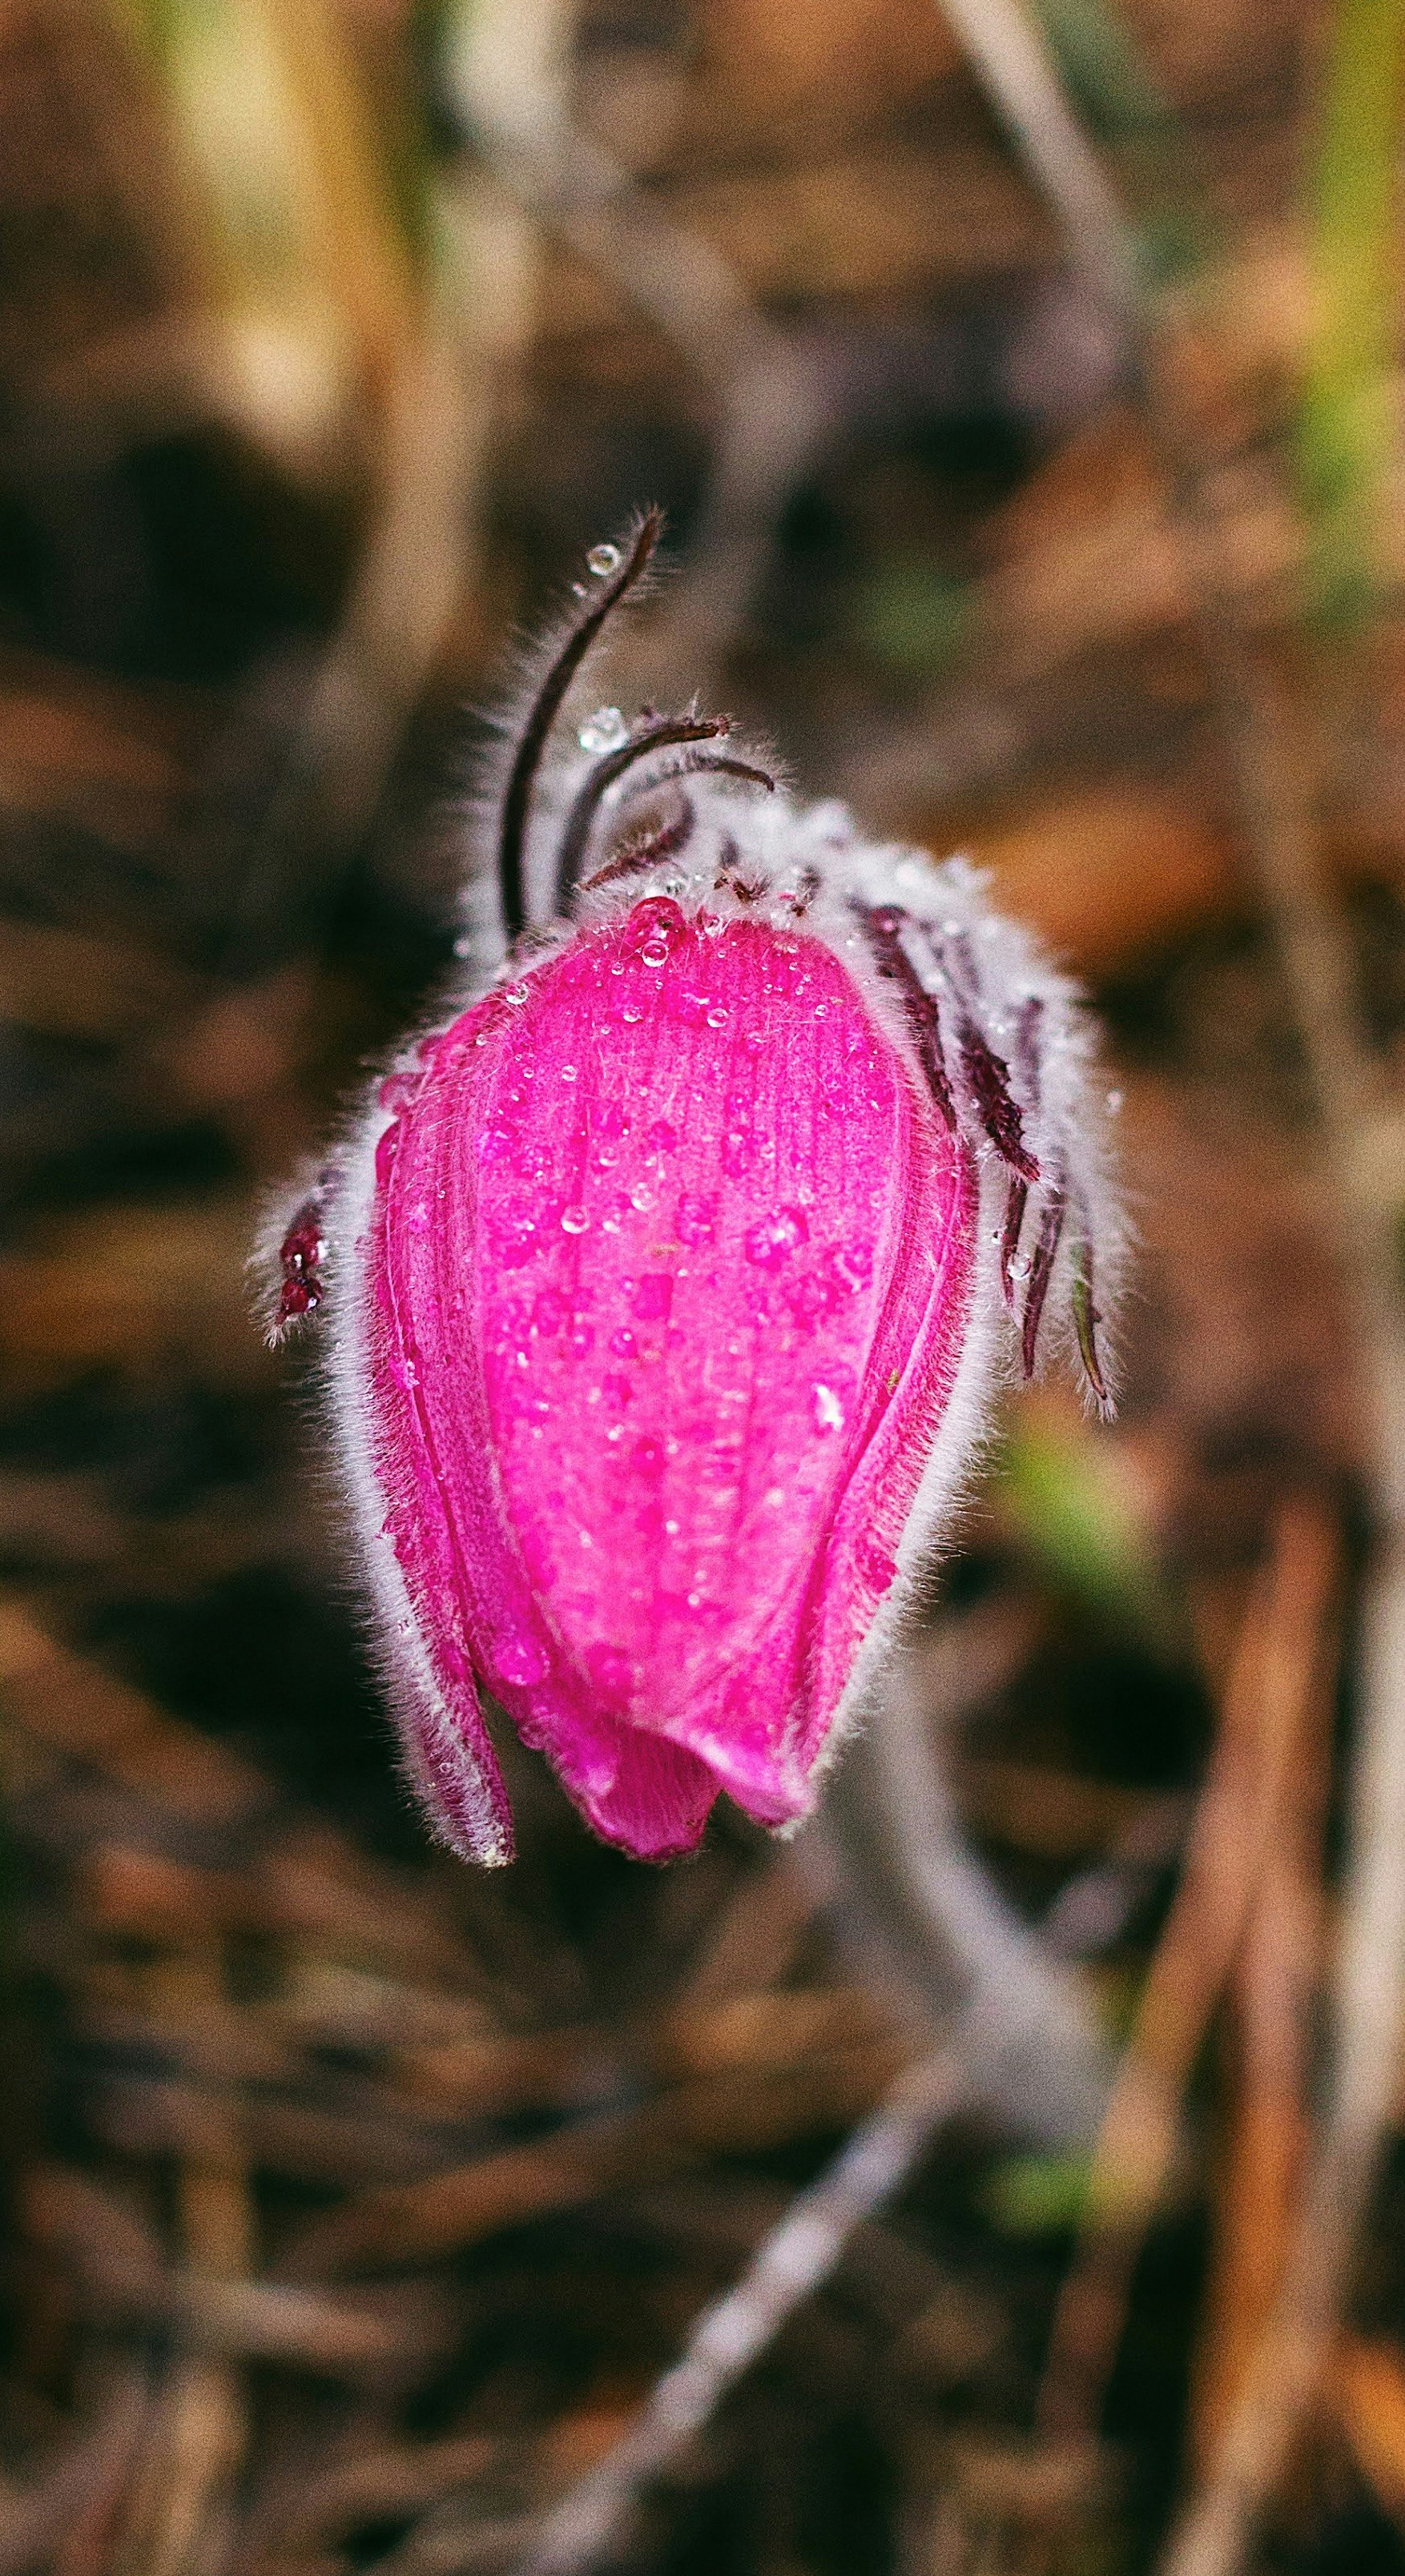 pink and white flower bud in close up photography